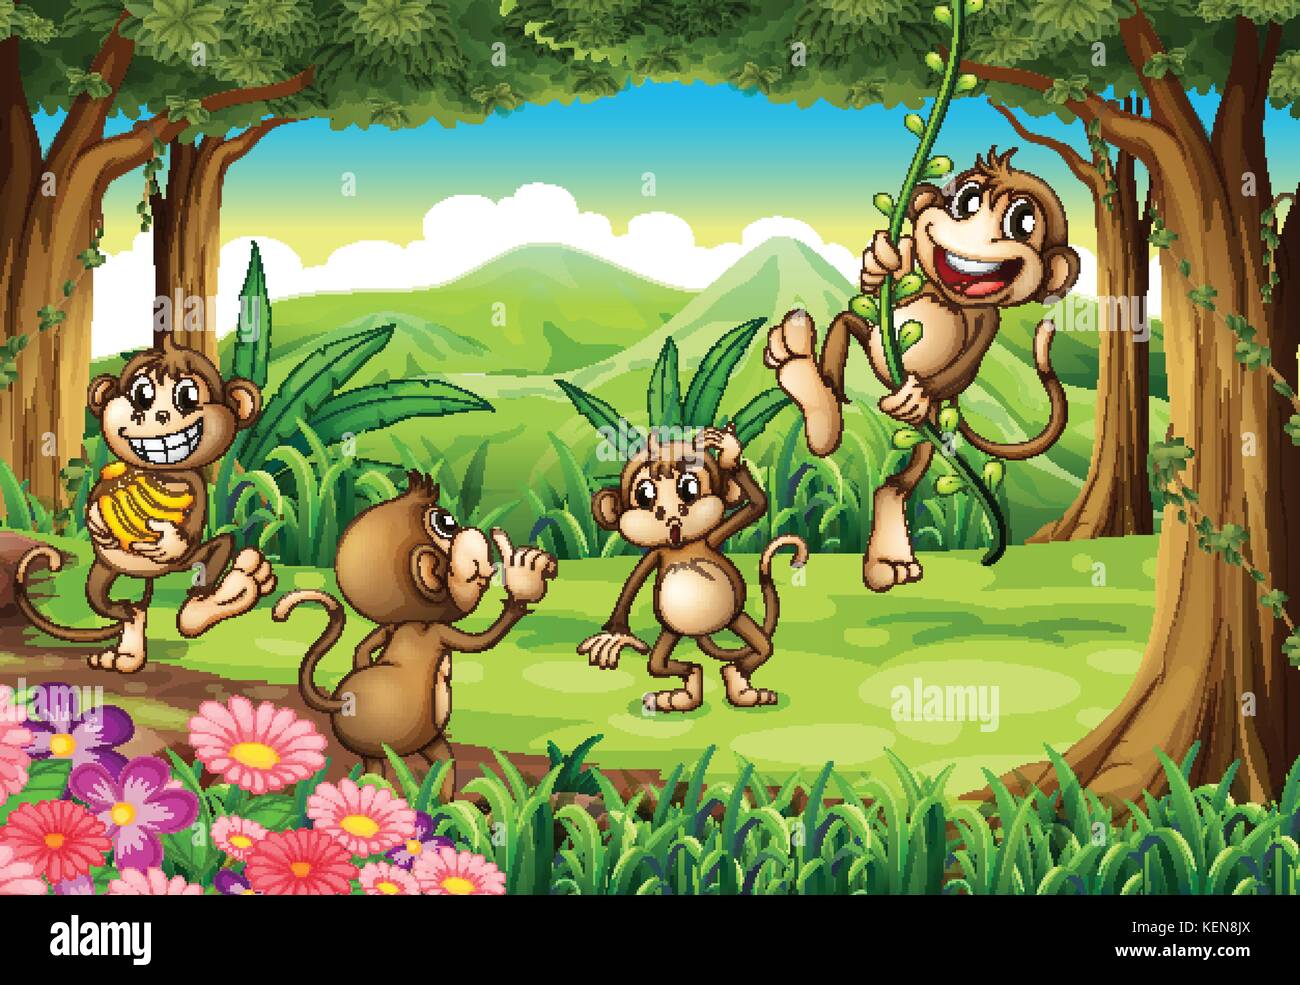 Illustration of monkeys playing in the forest Stock Vector